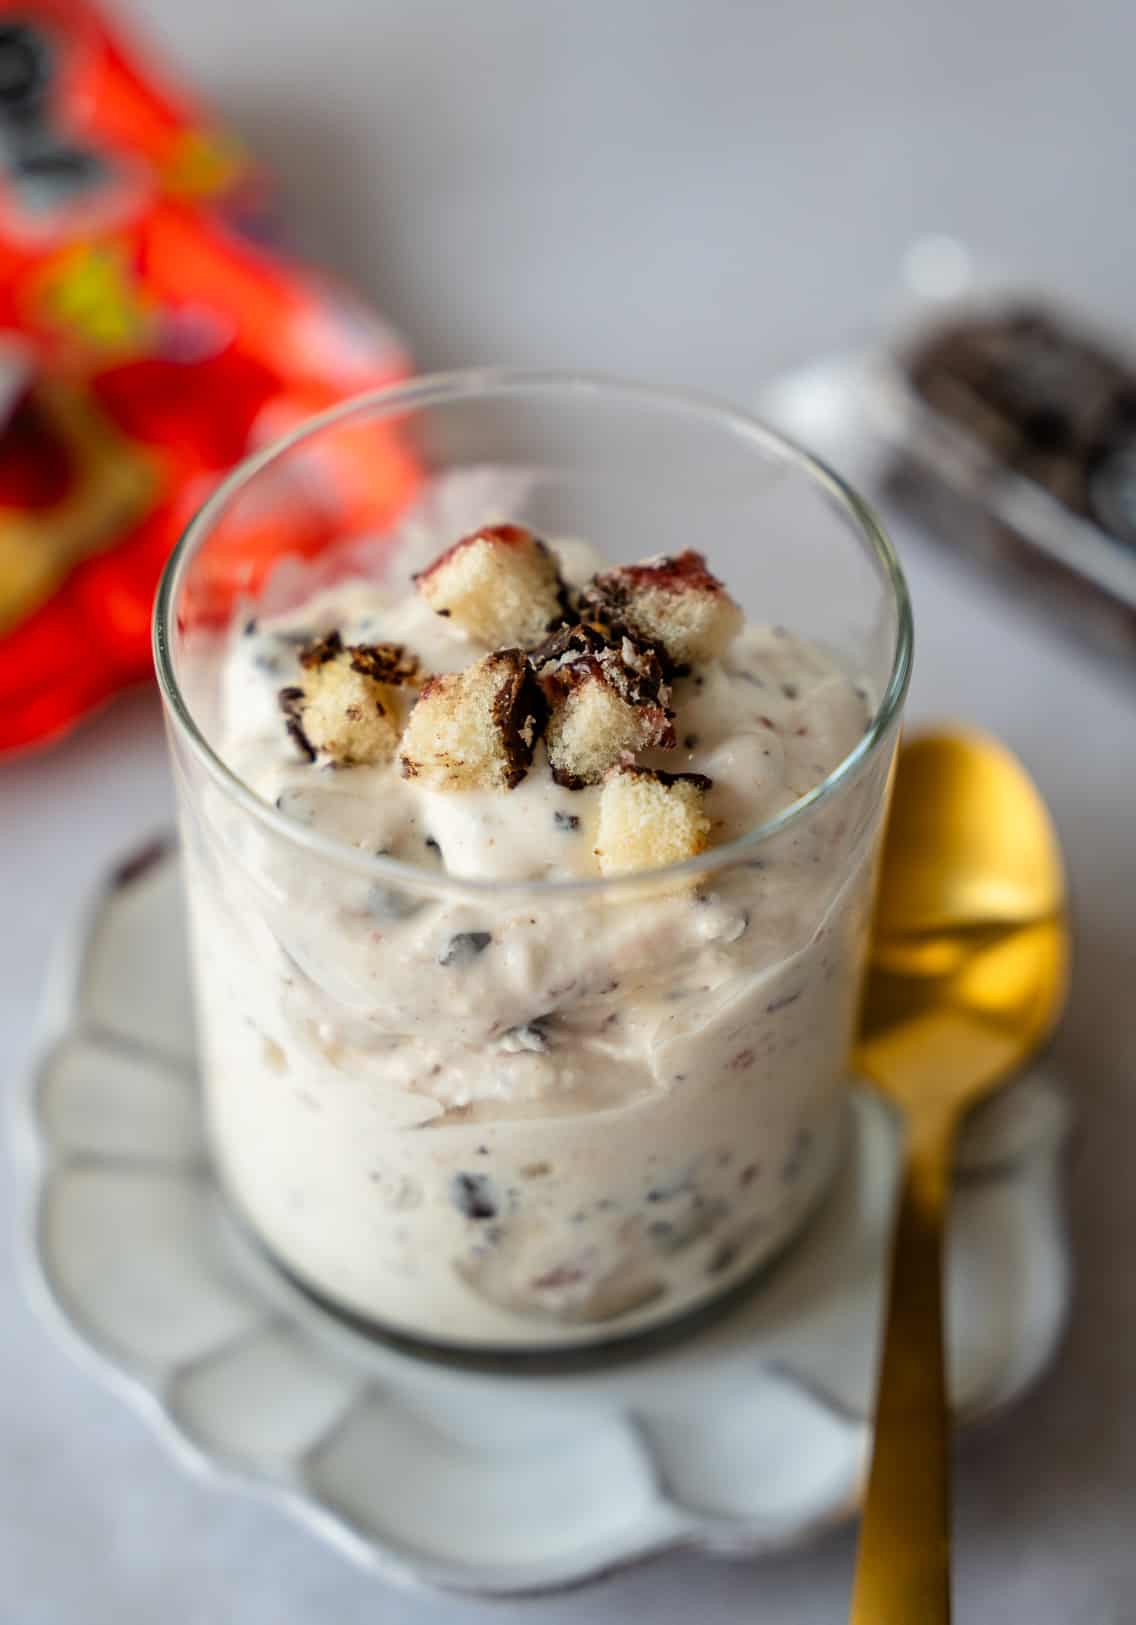 Ice cream in a glass cup with a gold spoon on the side and gansito pieces on top.